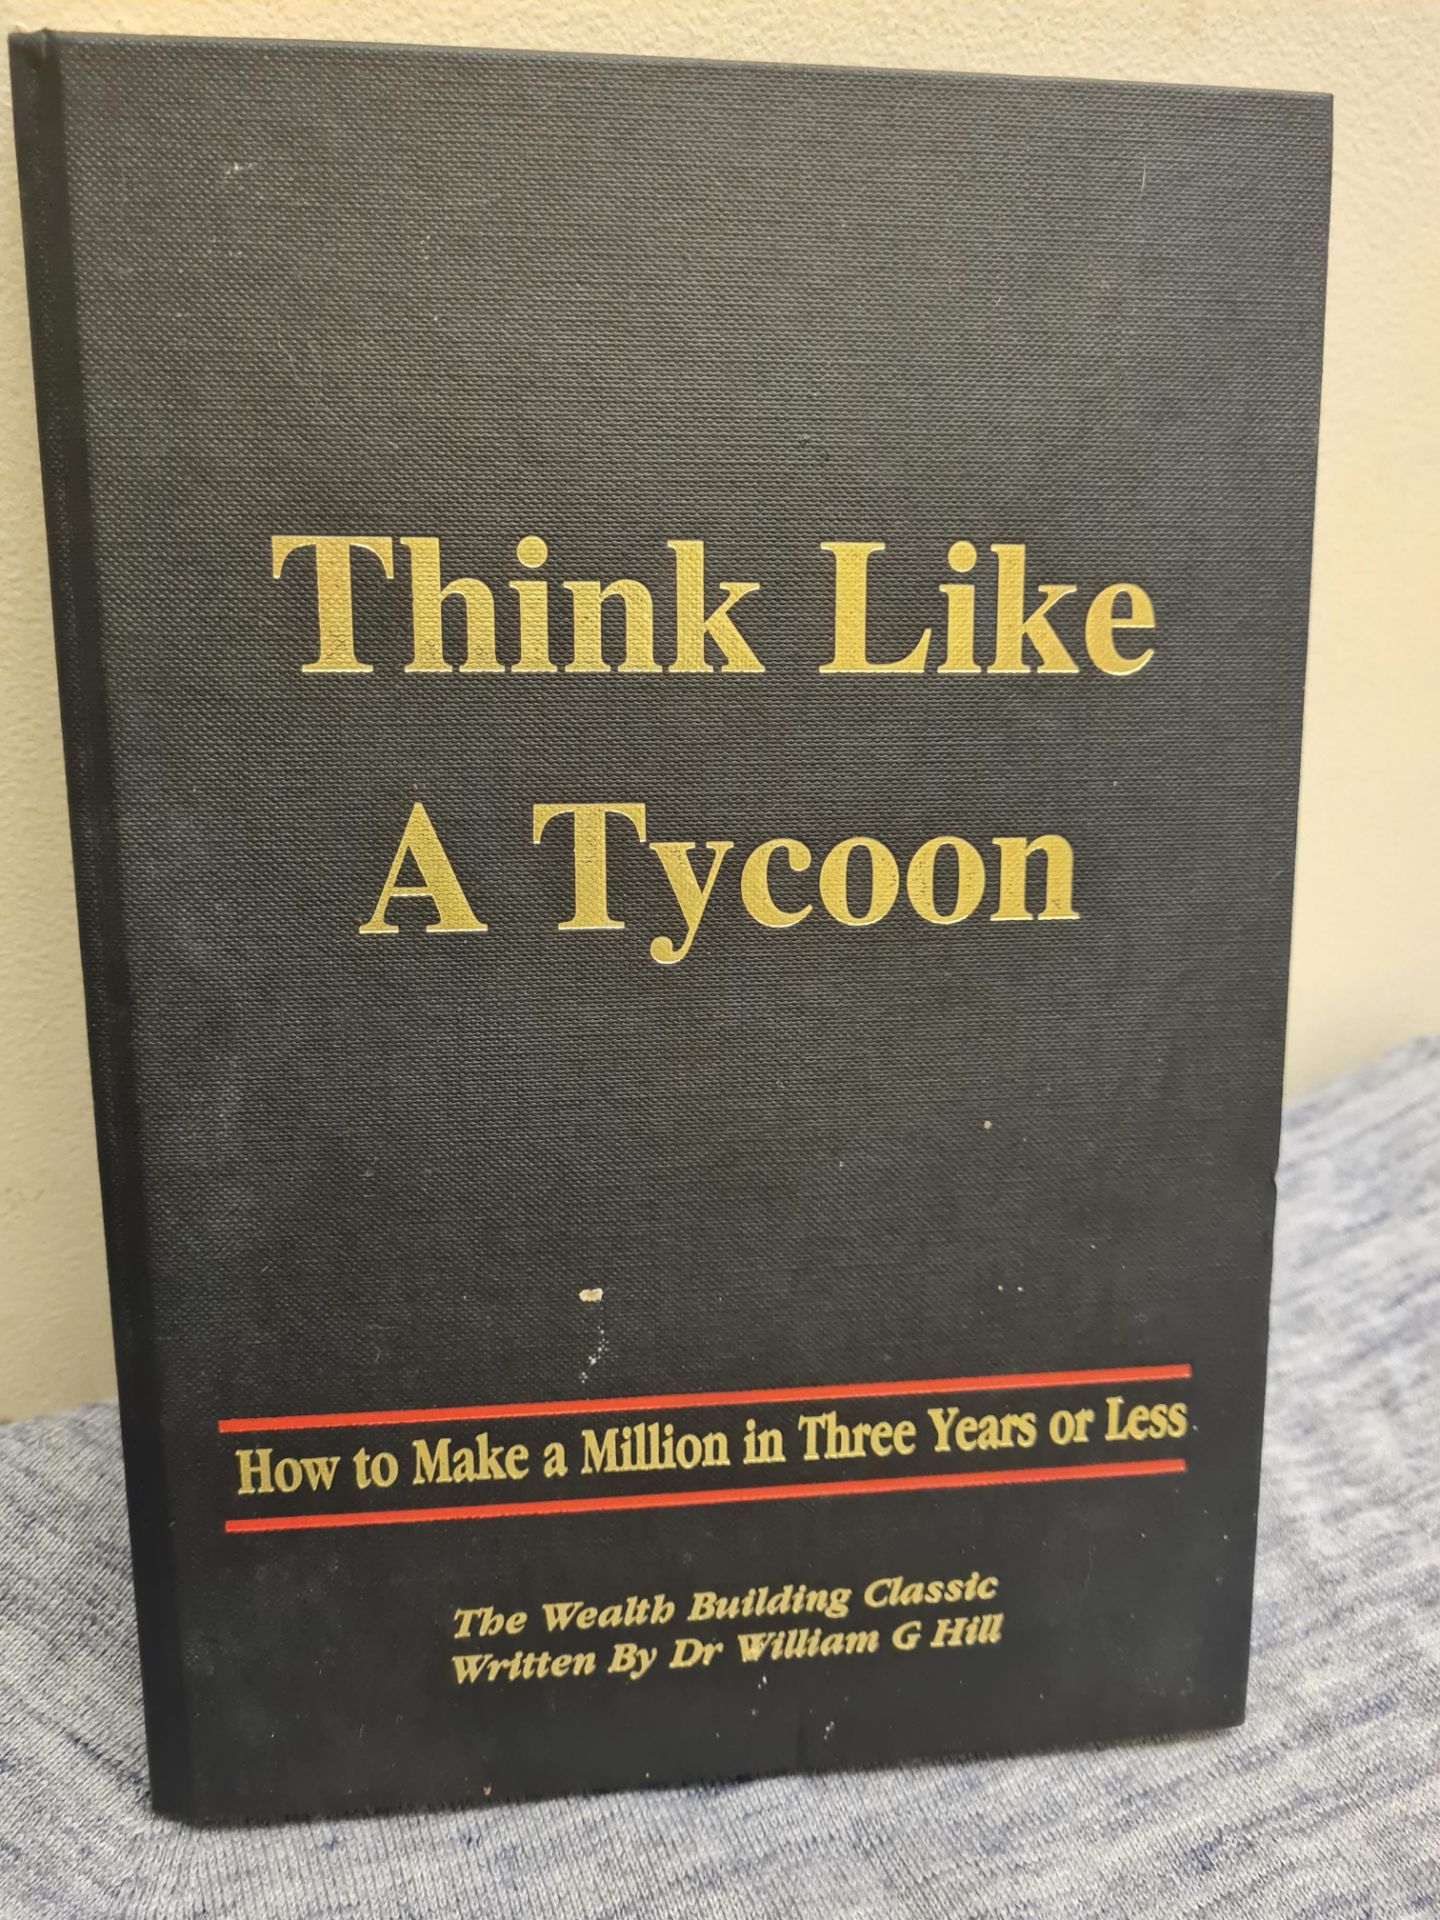 Think Like a tycoon book